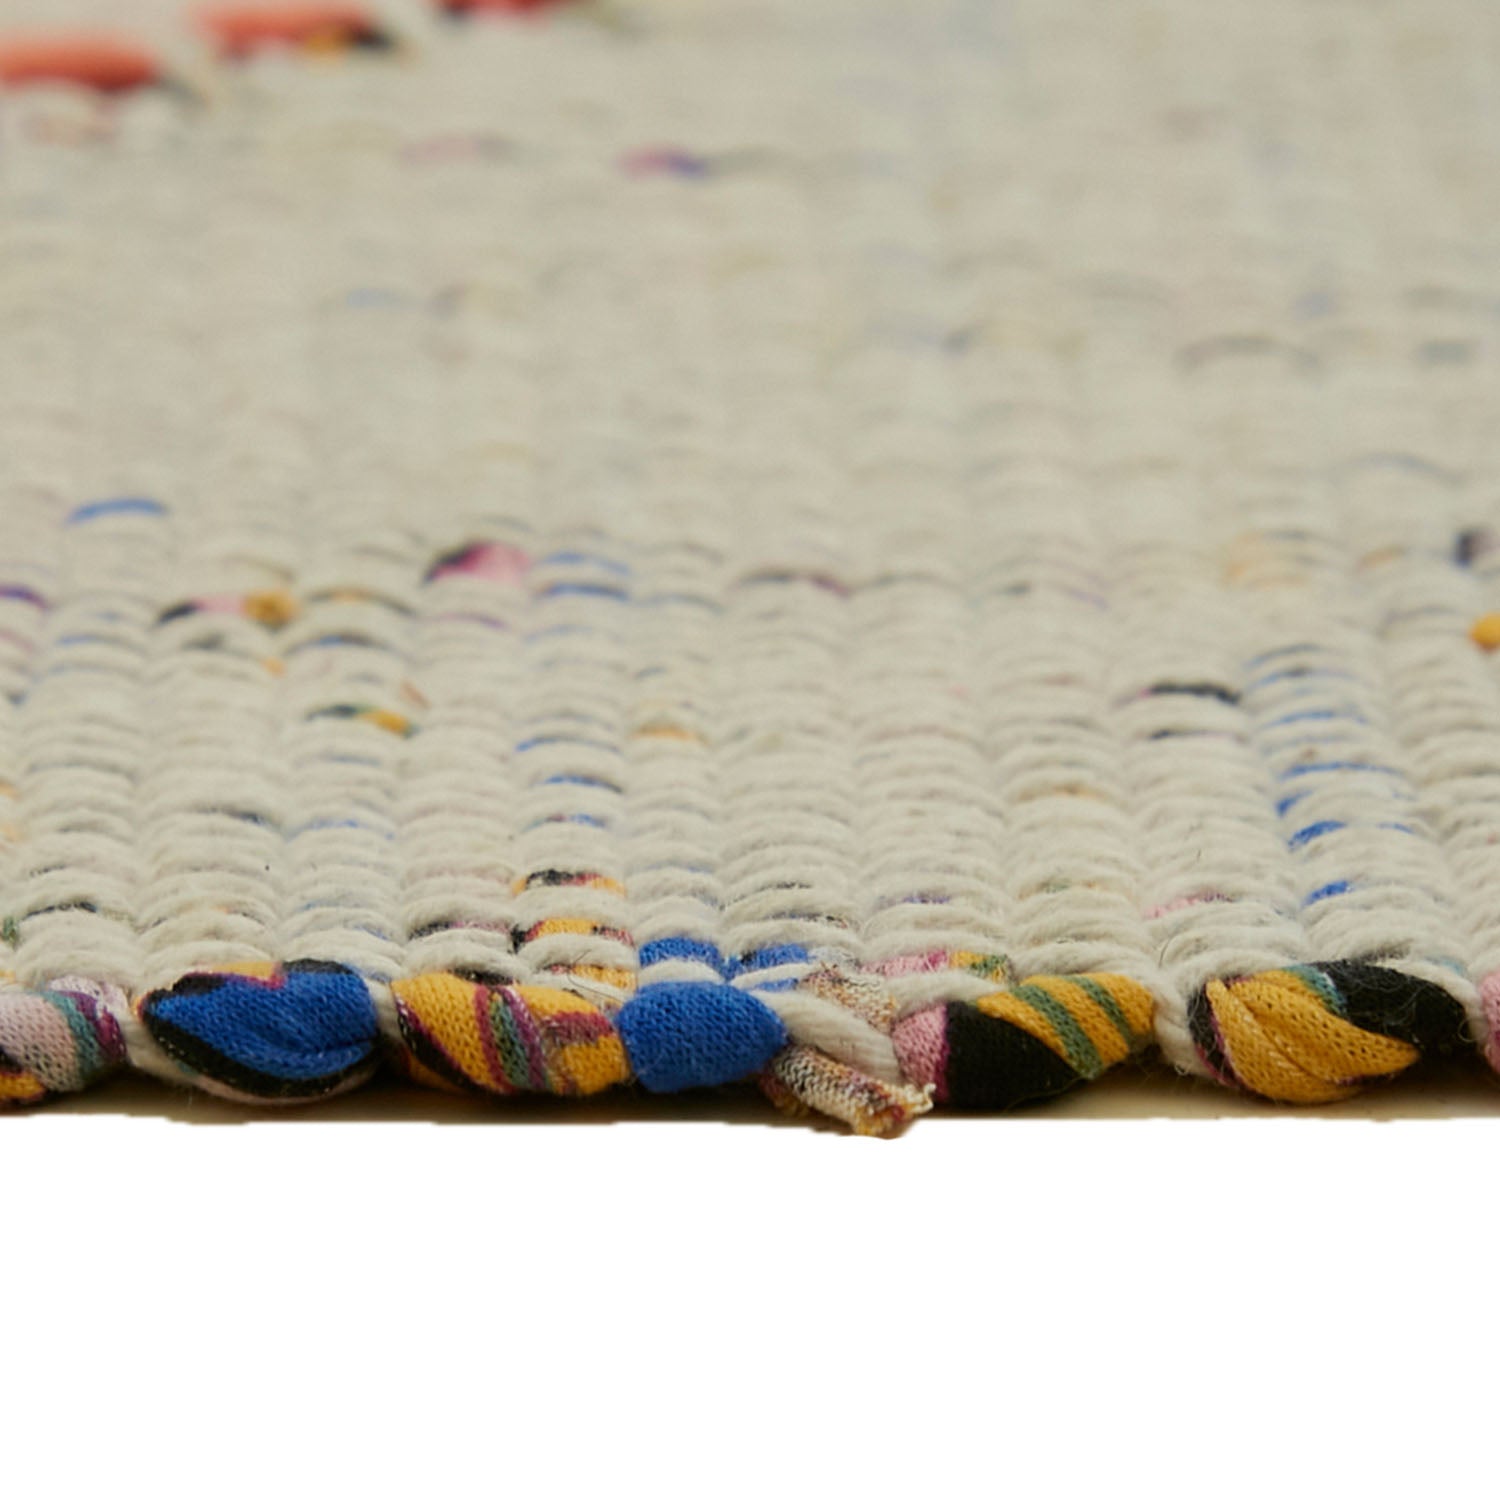 Close-up view of a textured, sturdy rug with colorful loops.